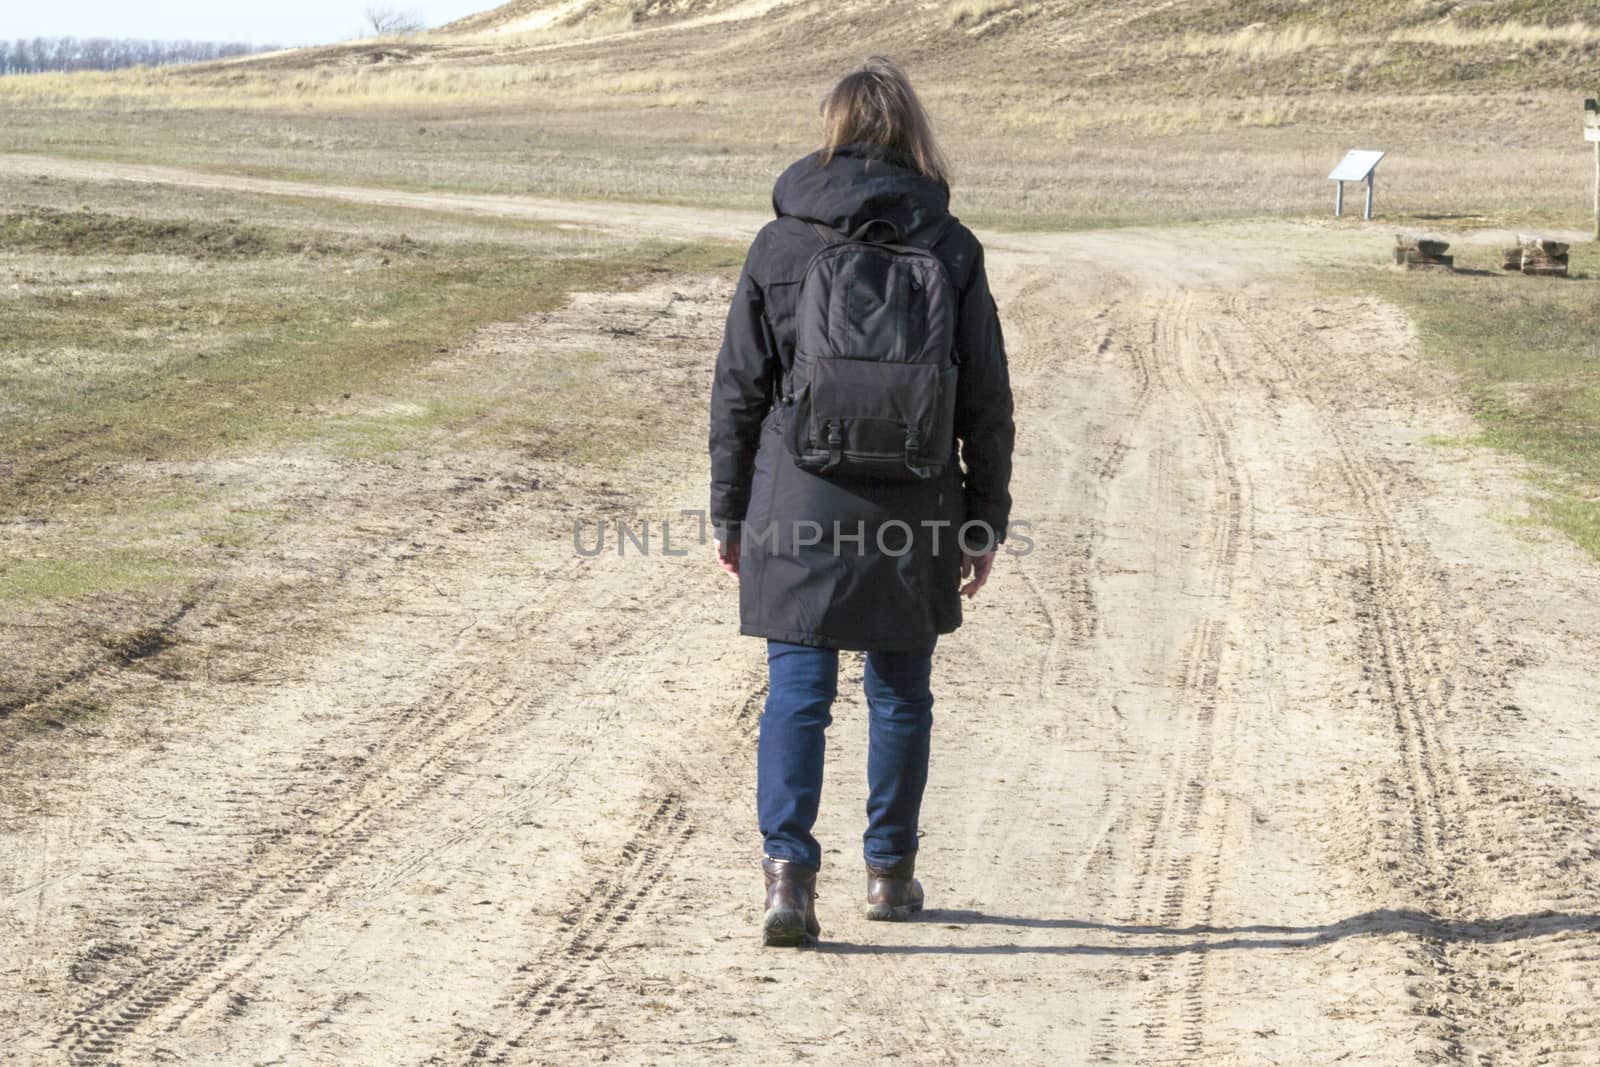 Caucasian woman in black coat arms raised on empty road towards sunset